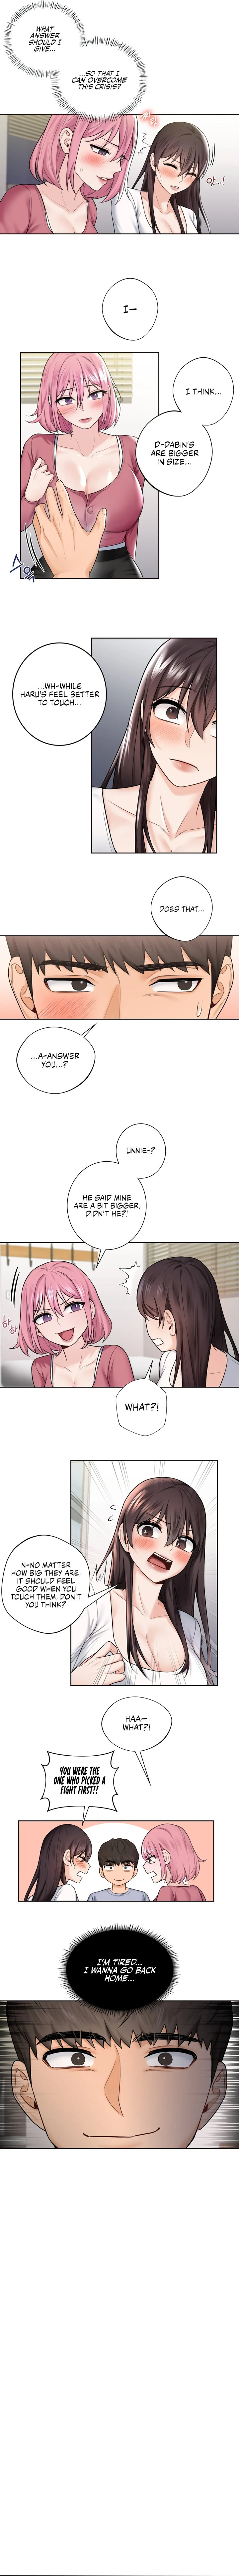 Not a friend – What do I call her as? - Chapter 20 Page 4